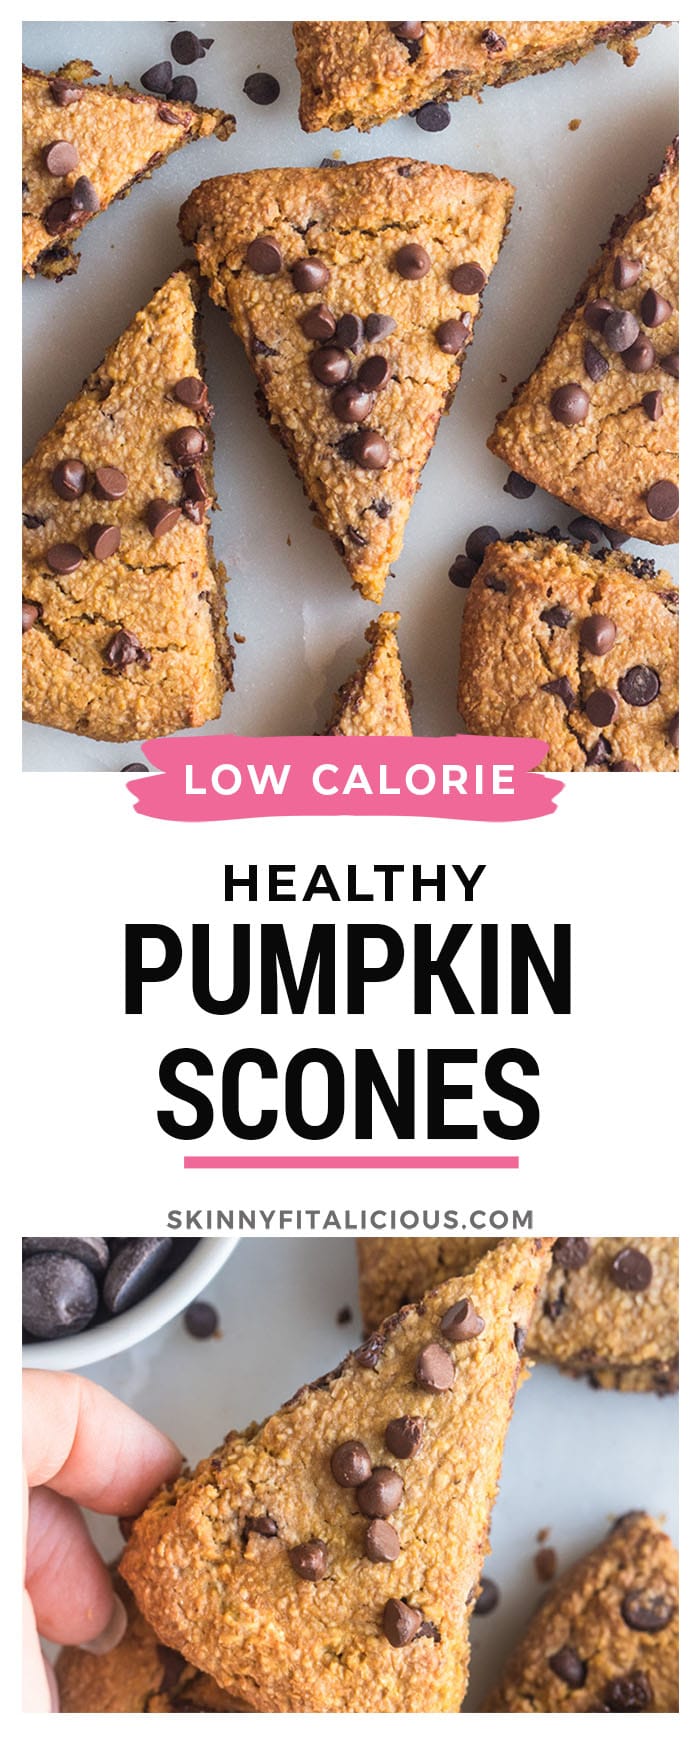 Healthy Pumpkin Scones made low calorie and gluten free with oat flour, minimal added sugar and chocolate chips. 